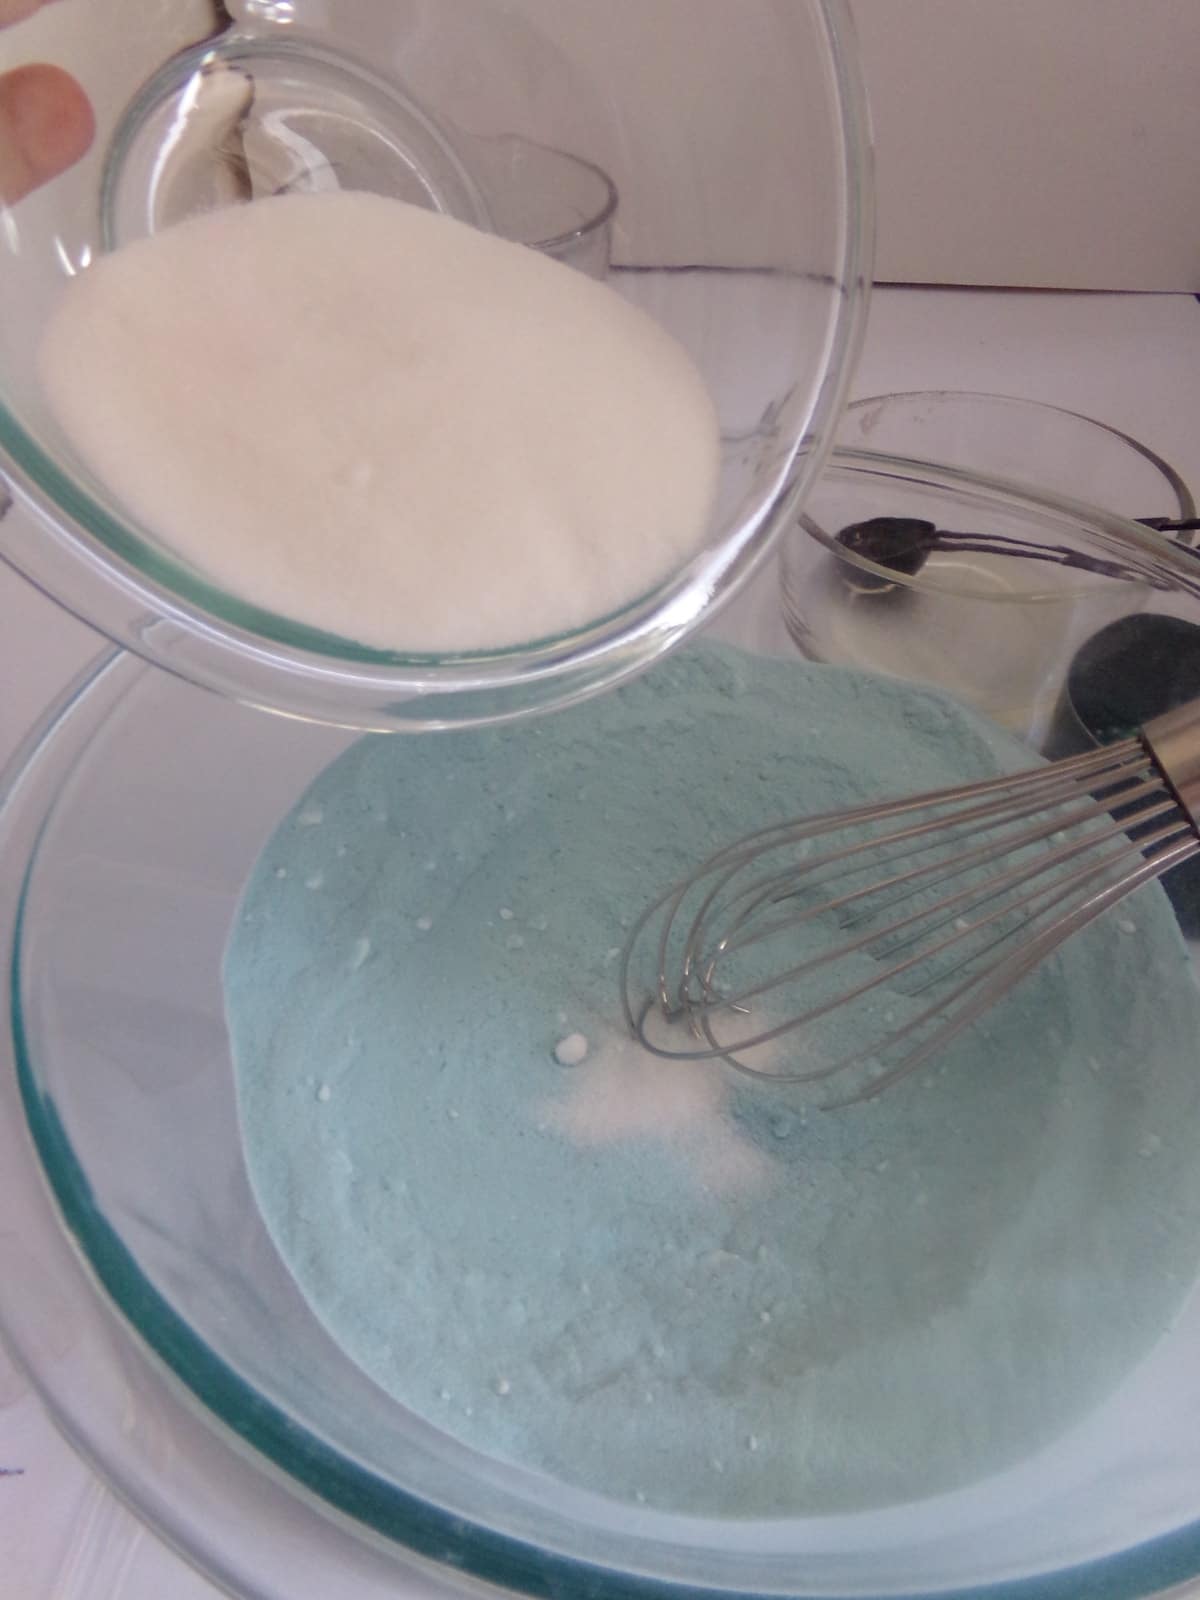 in-process step of mixing ingredients to make mermaid shell bath bombs